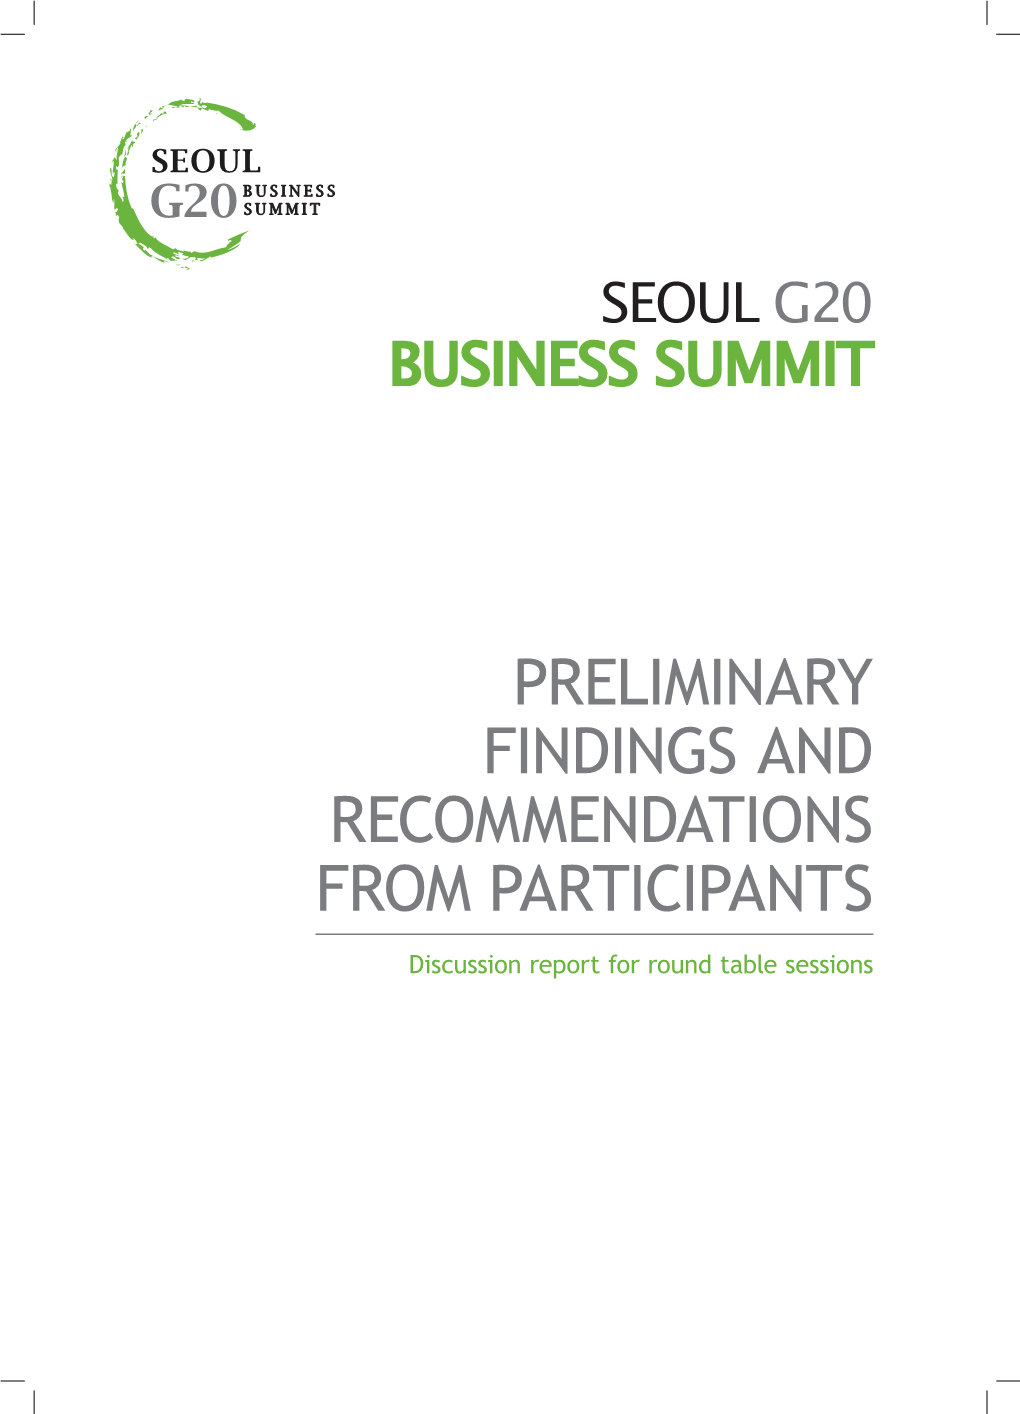 Preliminary Findings and Recommendations from Participants